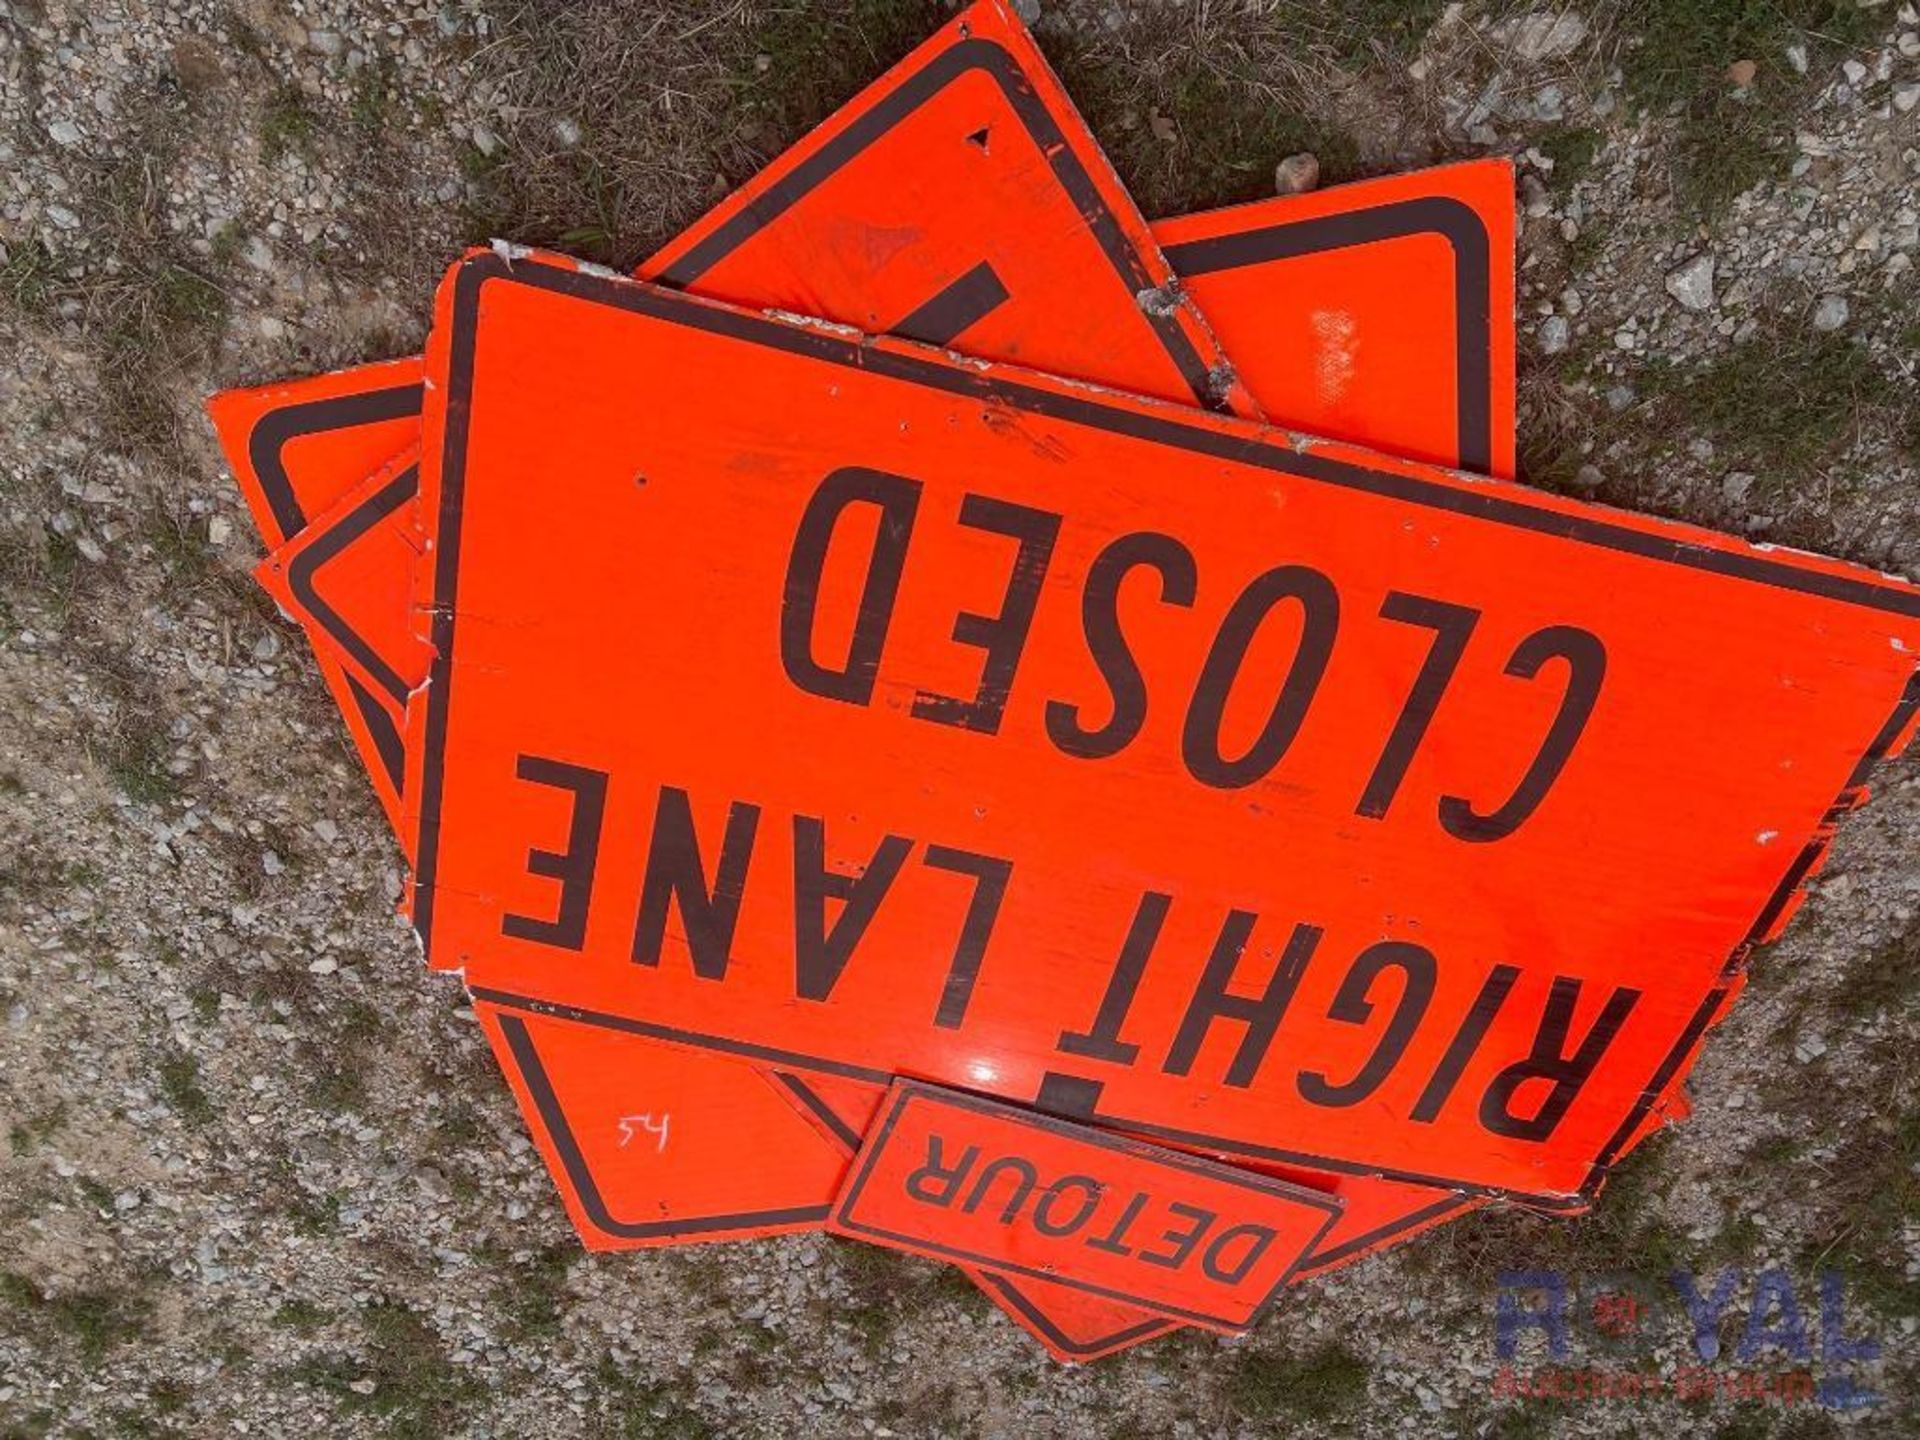 Road Work Signs